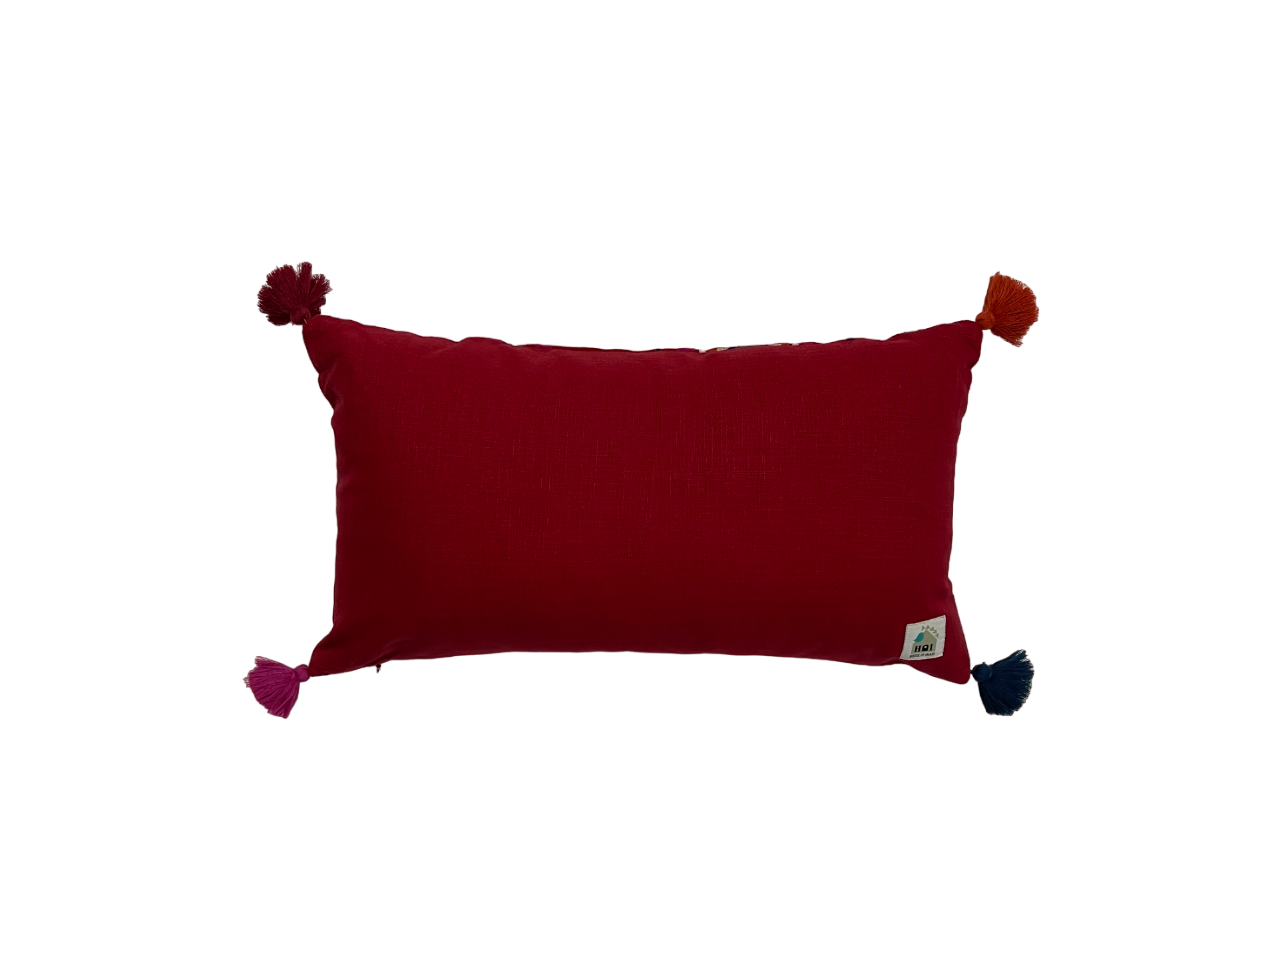 Tashkent Suzani Embroidered Red Cushion Cover with Tassels